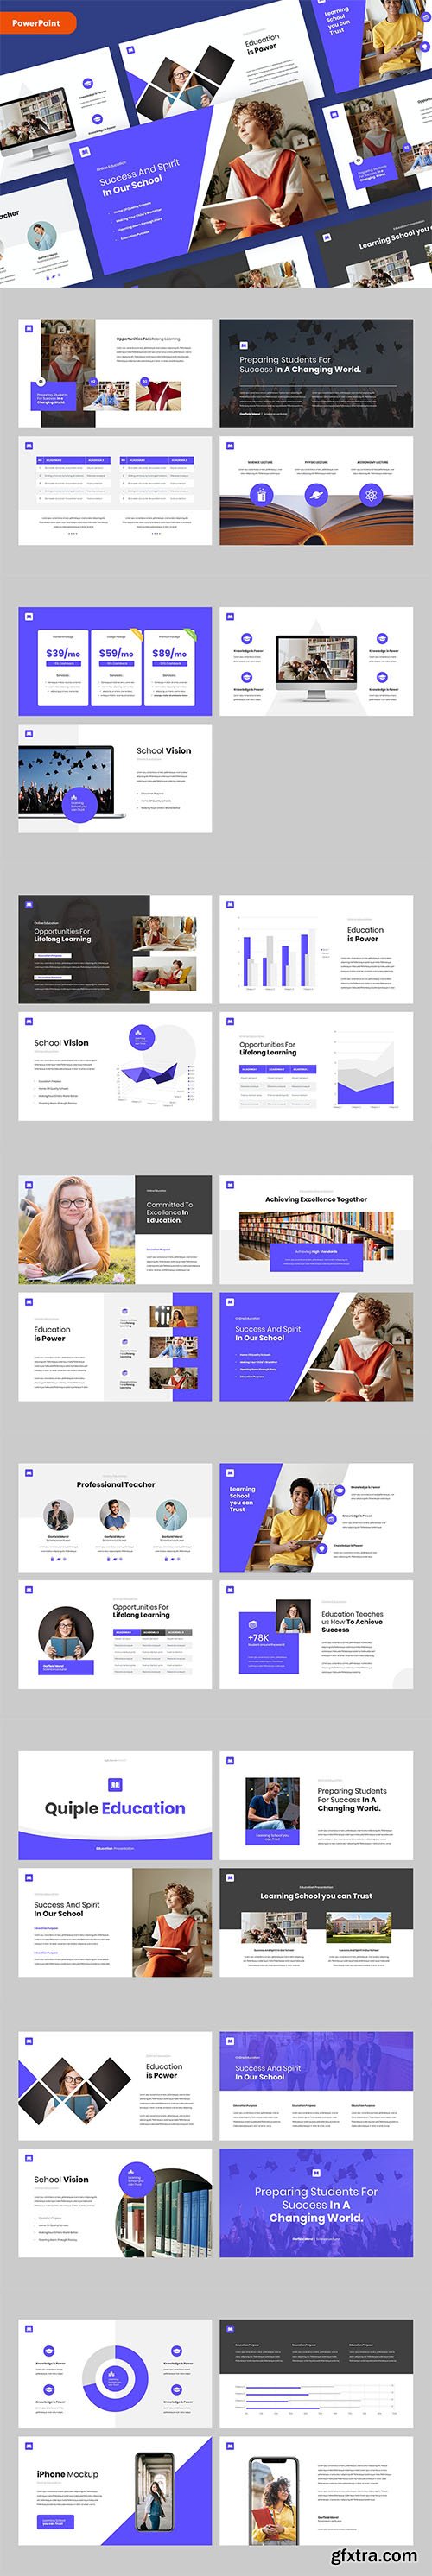 QUIPLE - Education Powerpoint Template